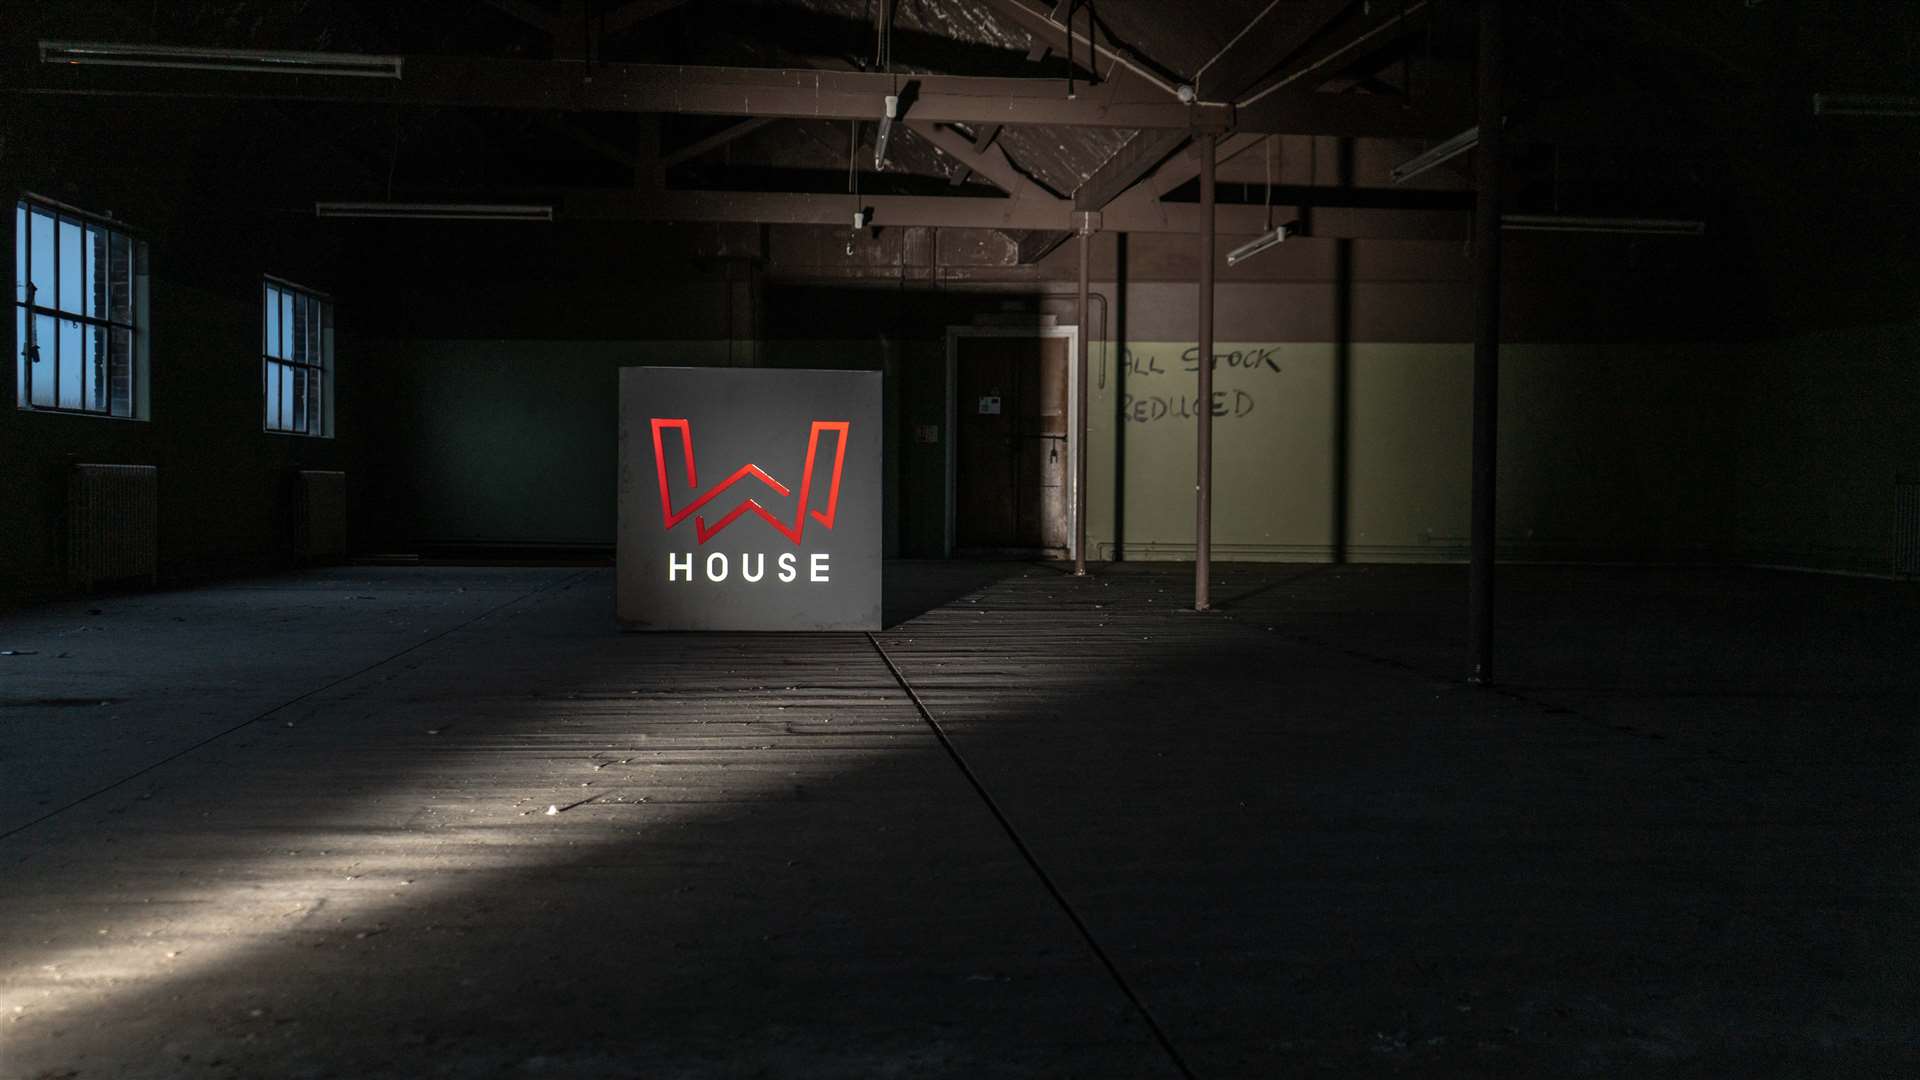 The warehouse that could soon become an events venue.